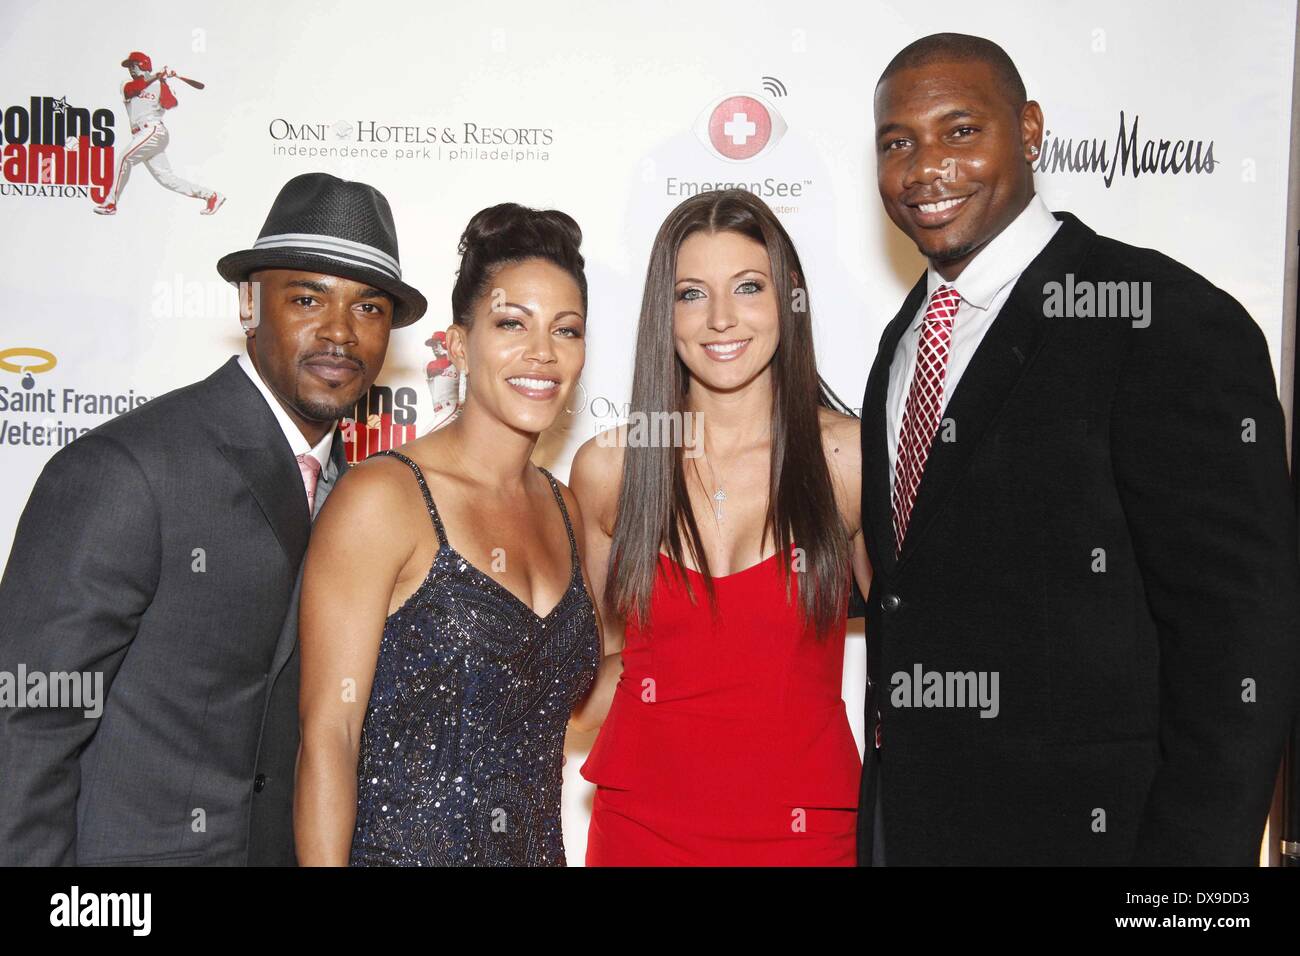 Jimmy Rollins with his wife, Johari and Ryan Howard and fiance at Jimmy  Rollins charity event 'A Night In Paris' at the National Constitution  Center in Philadelphia Featuring: Jimmy Rollins with his